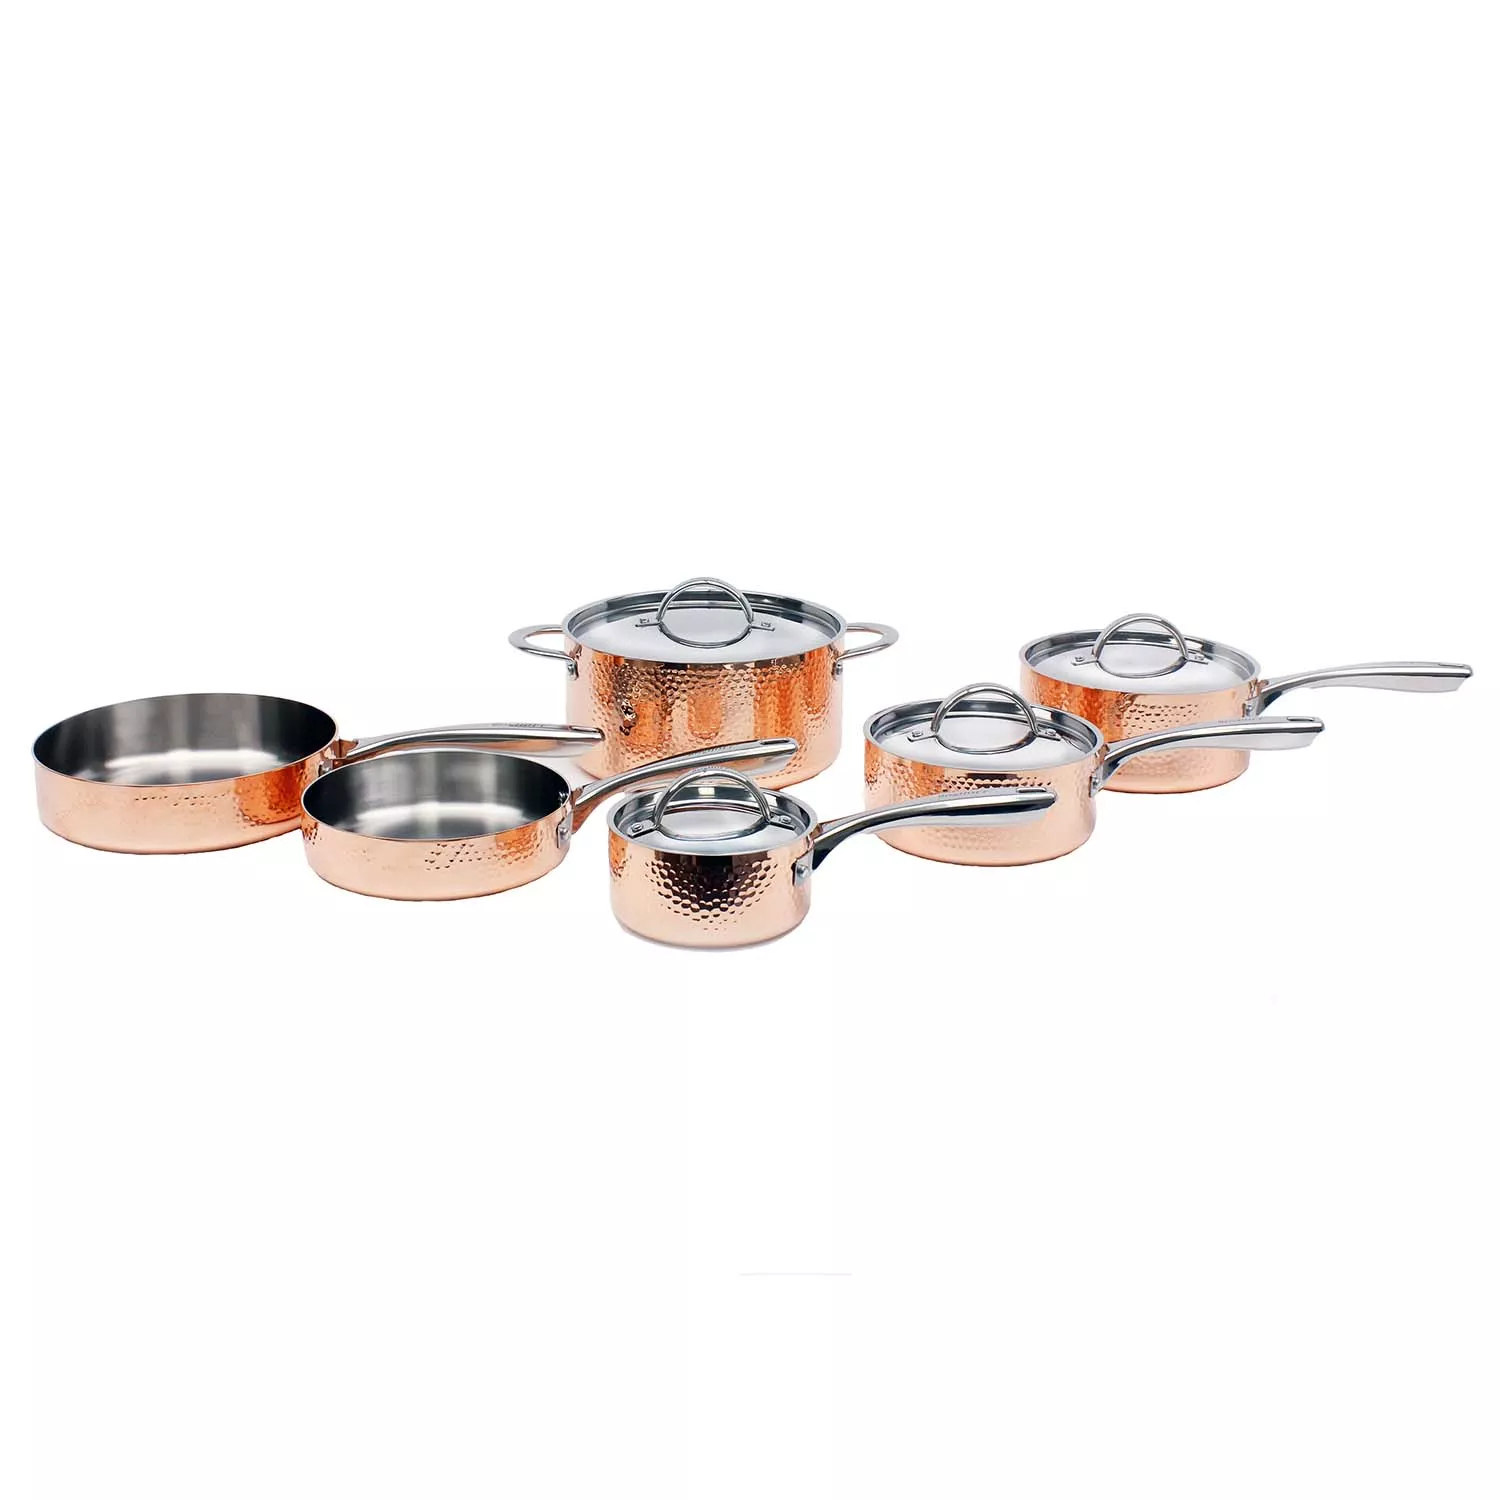 Viking Copper Hammered 10-Piece Cookware Set + Reviews